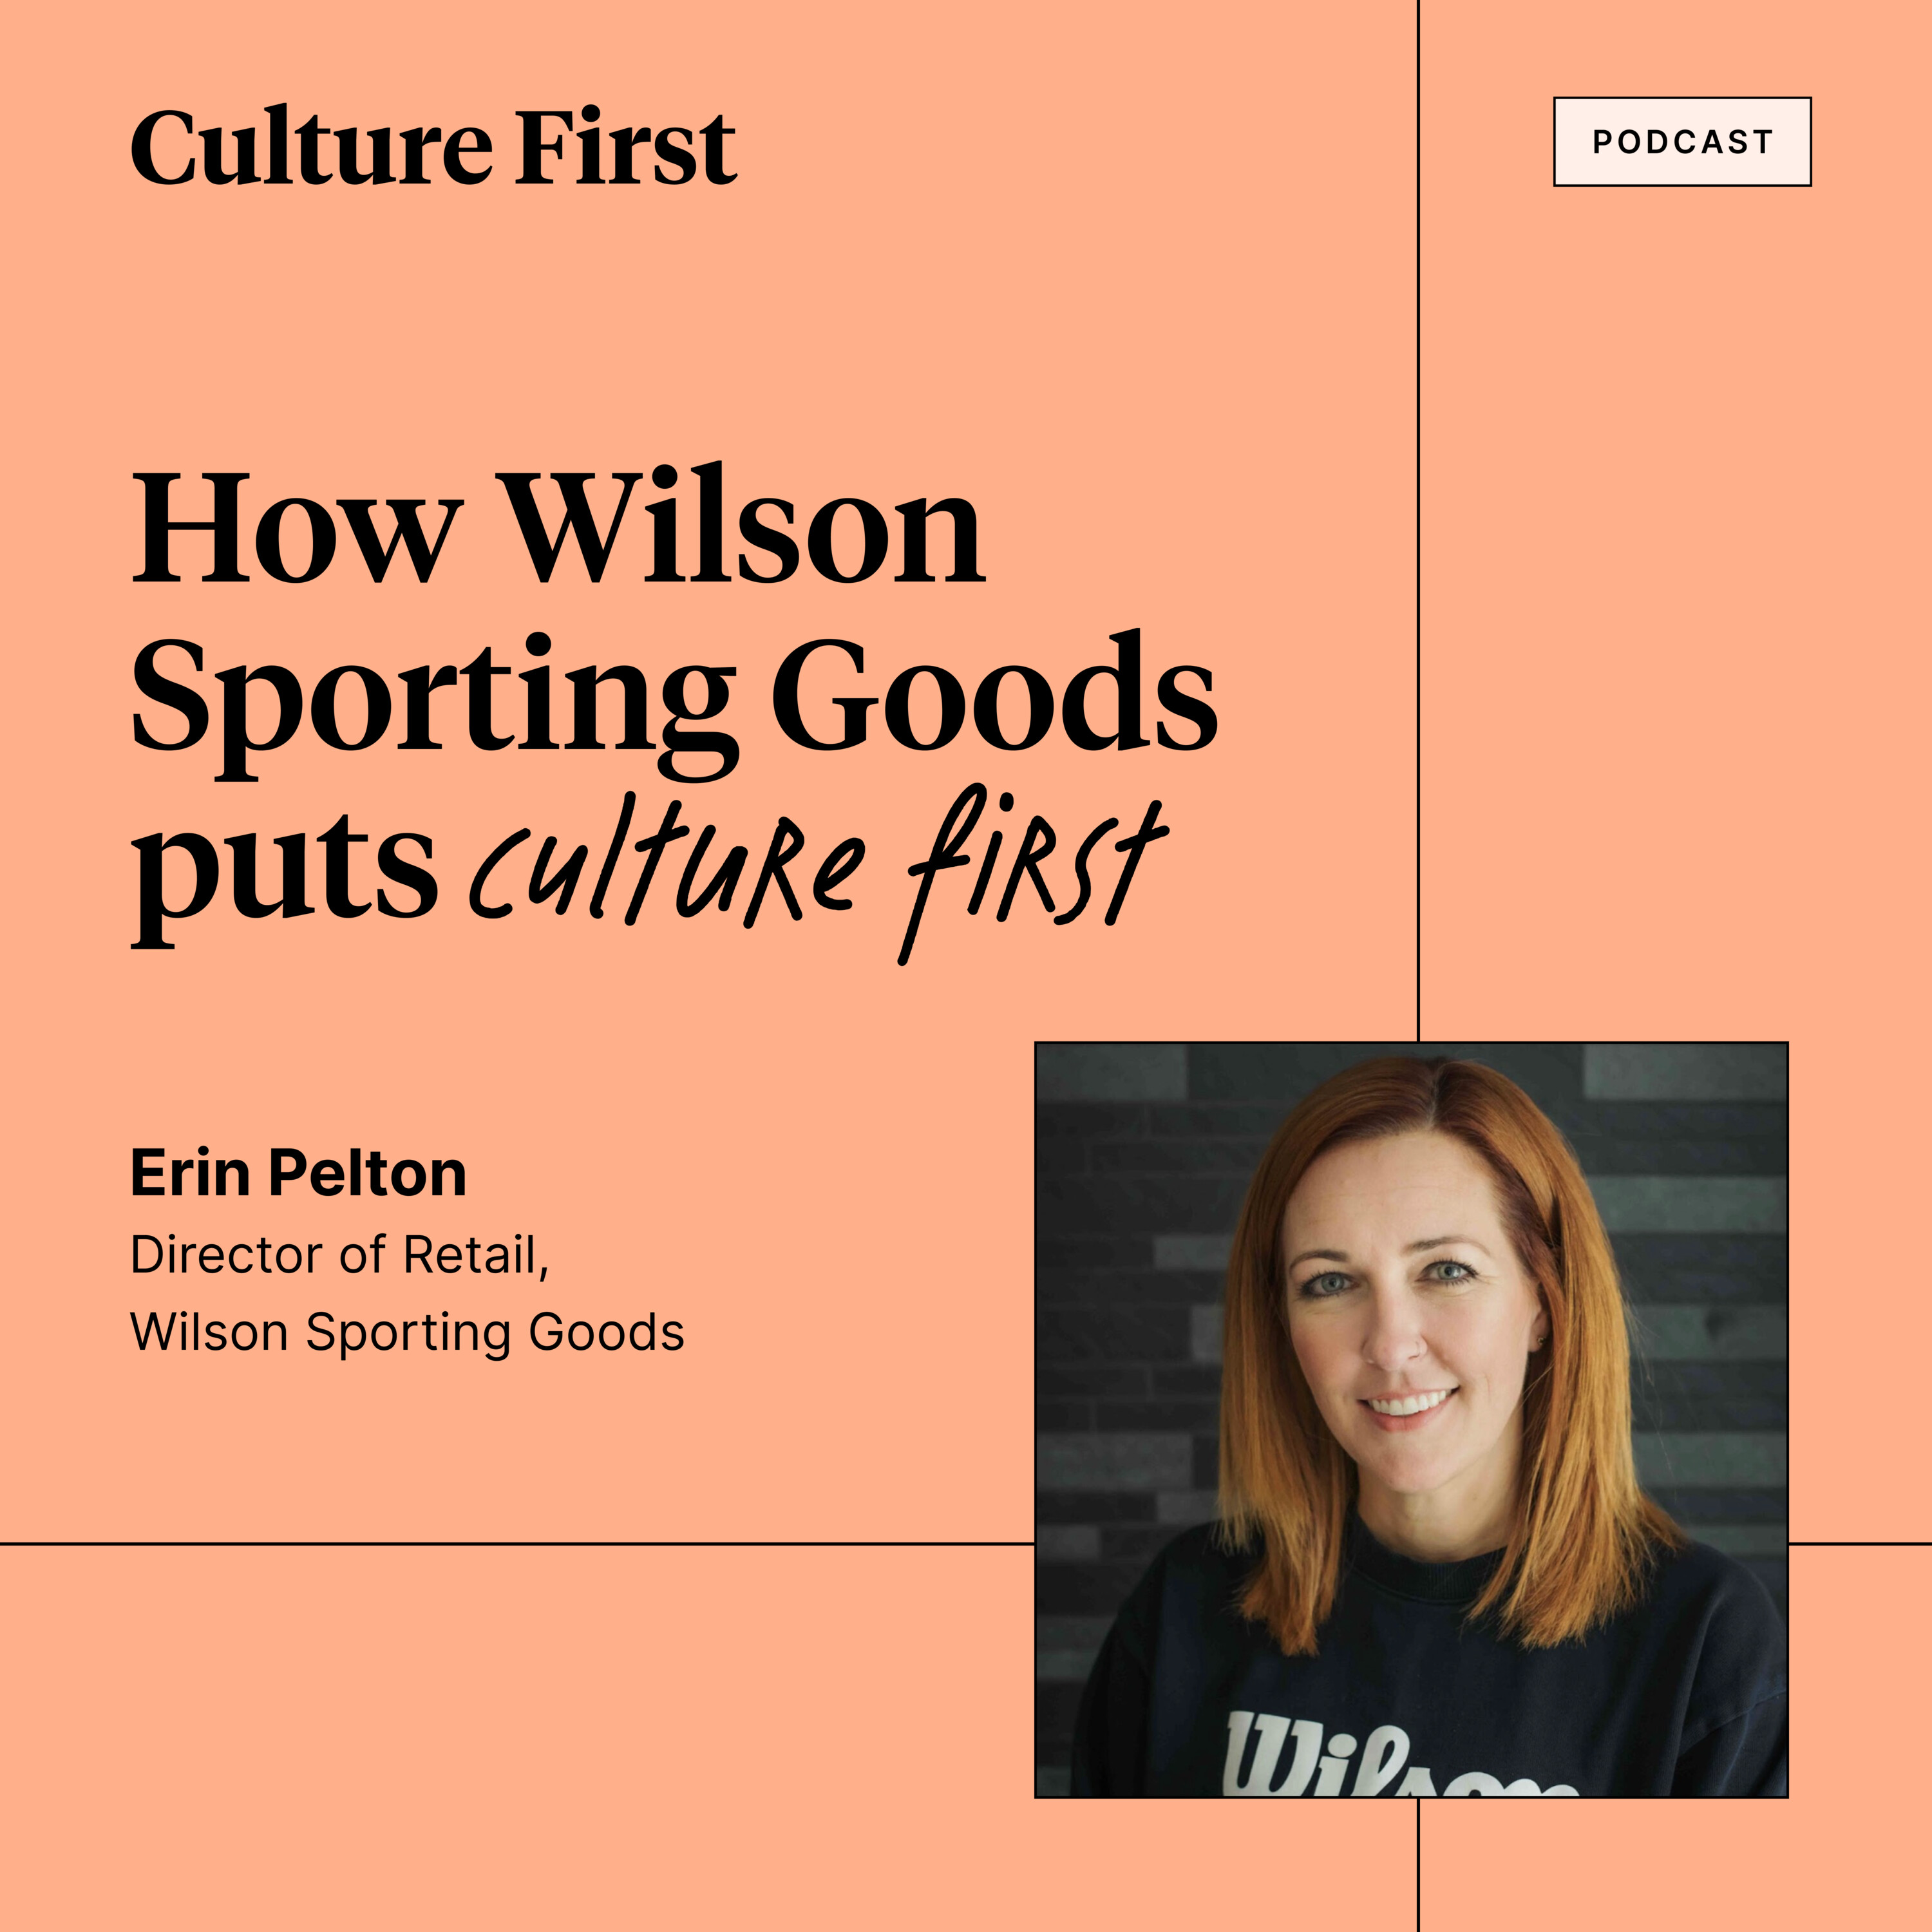 How Wilson Sporting Goods puts Culture First, with Director of Retail Erin Pelton, Part 3 of 3. 